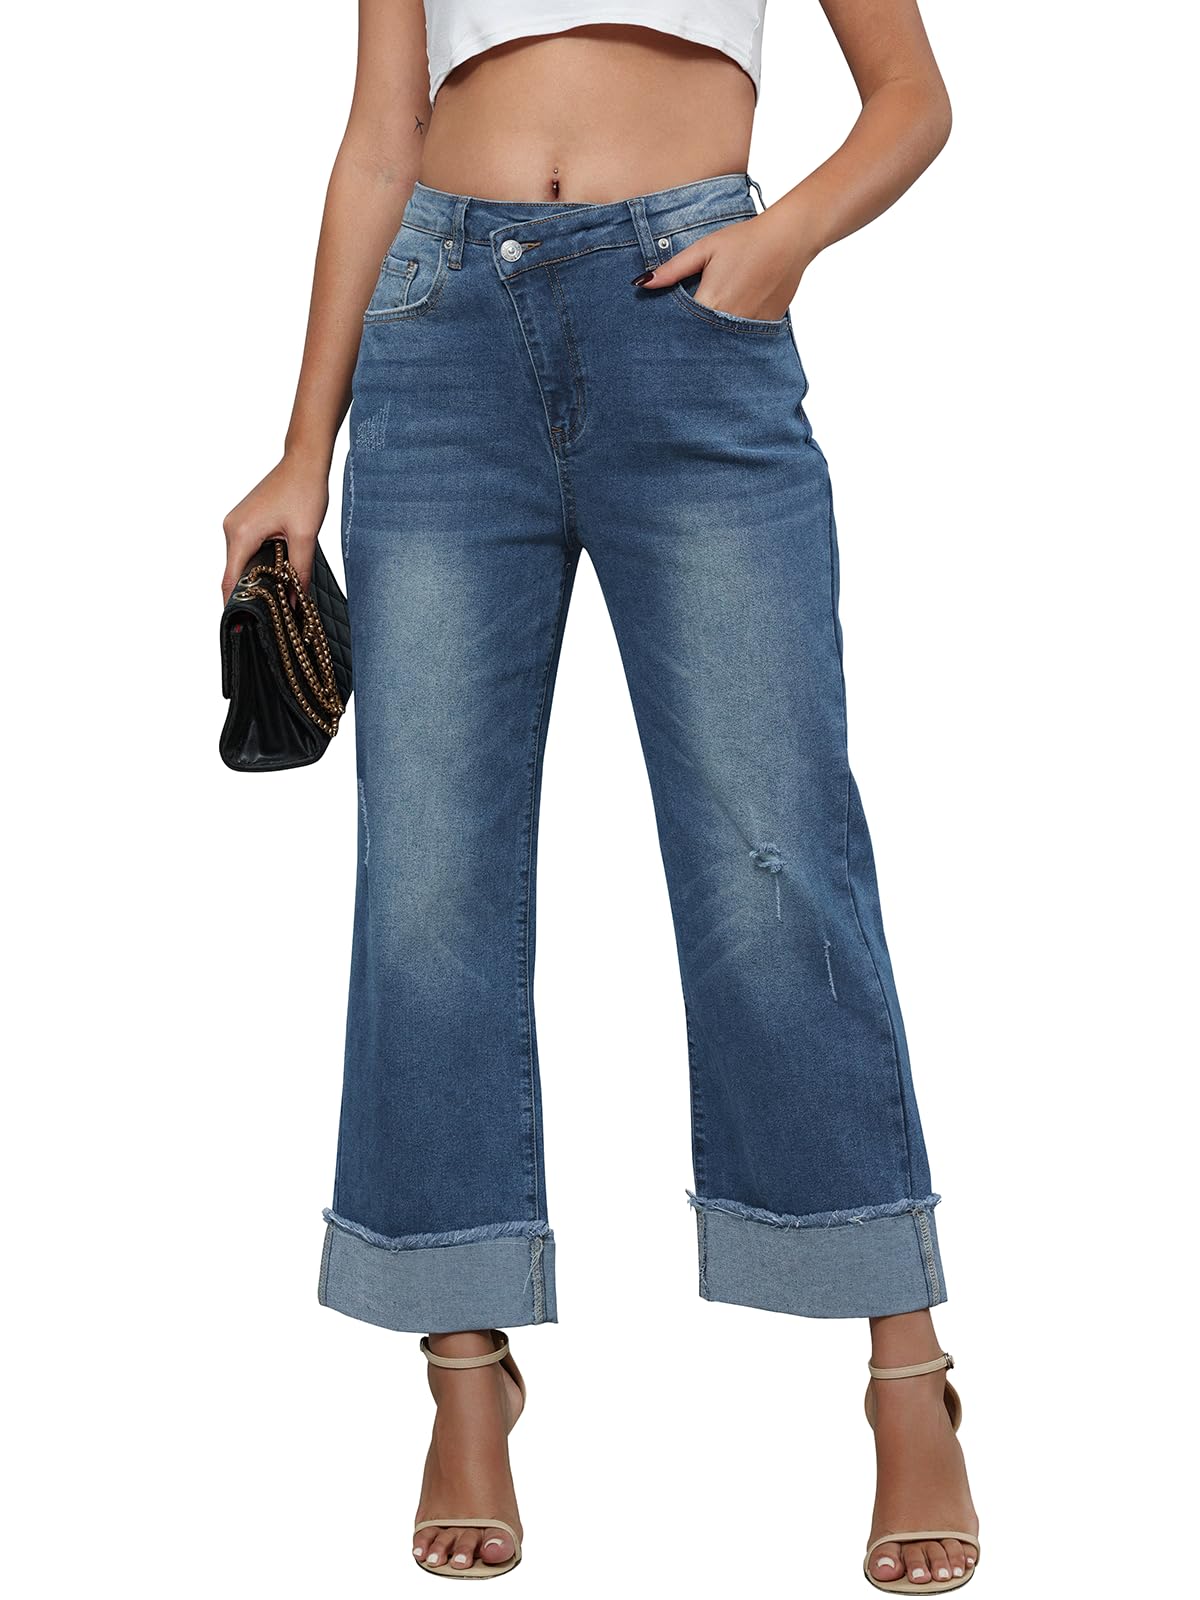 Genleck Women's Wide Leg High Waisted Jeans Crossover Baggy Jeans